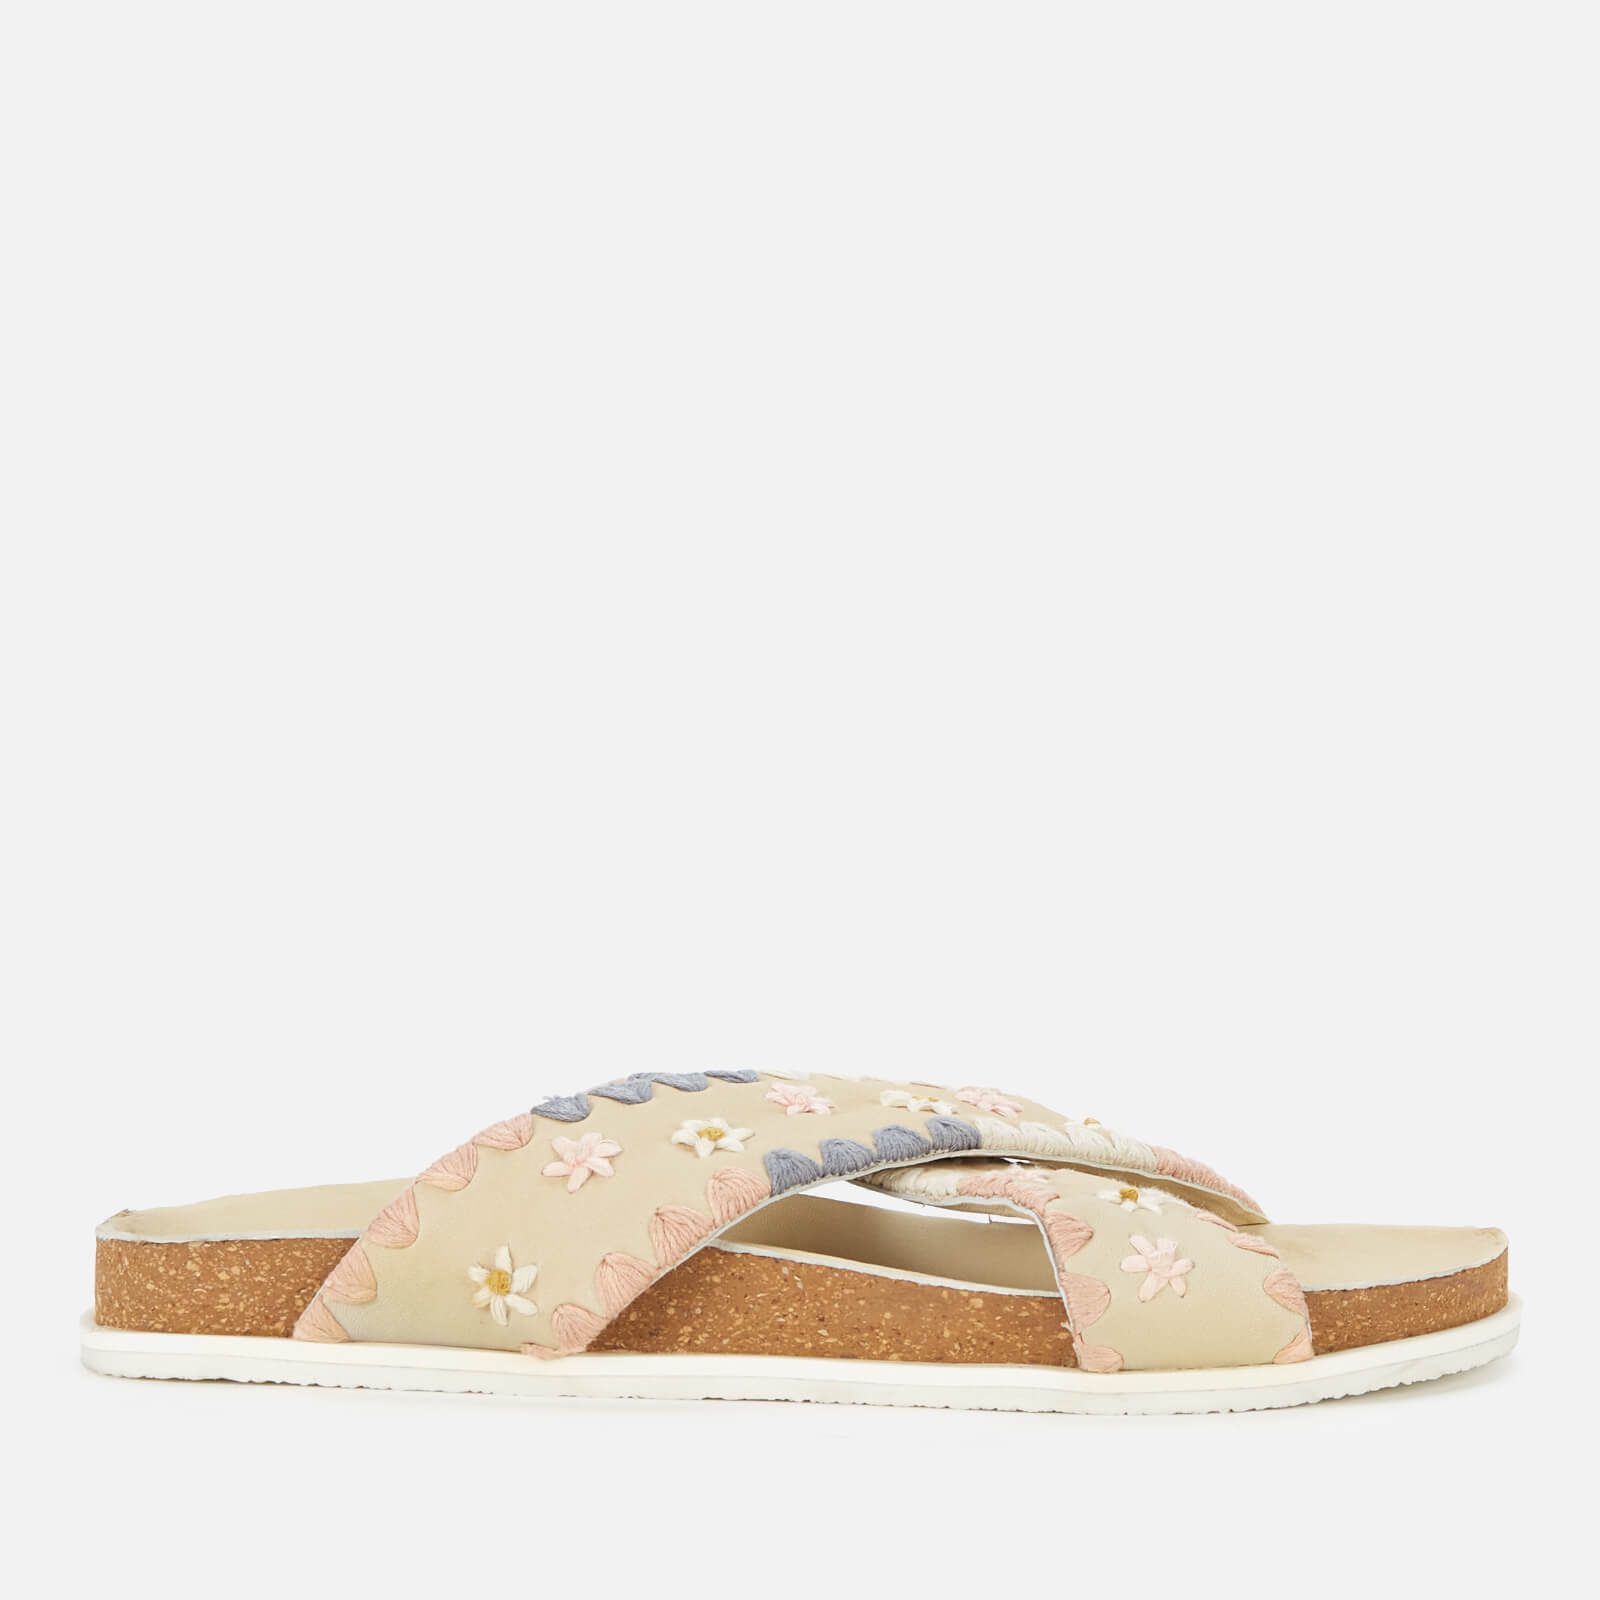 Free People Women's Wildflowers Crossband Sandals - Washed Natural - UK 4